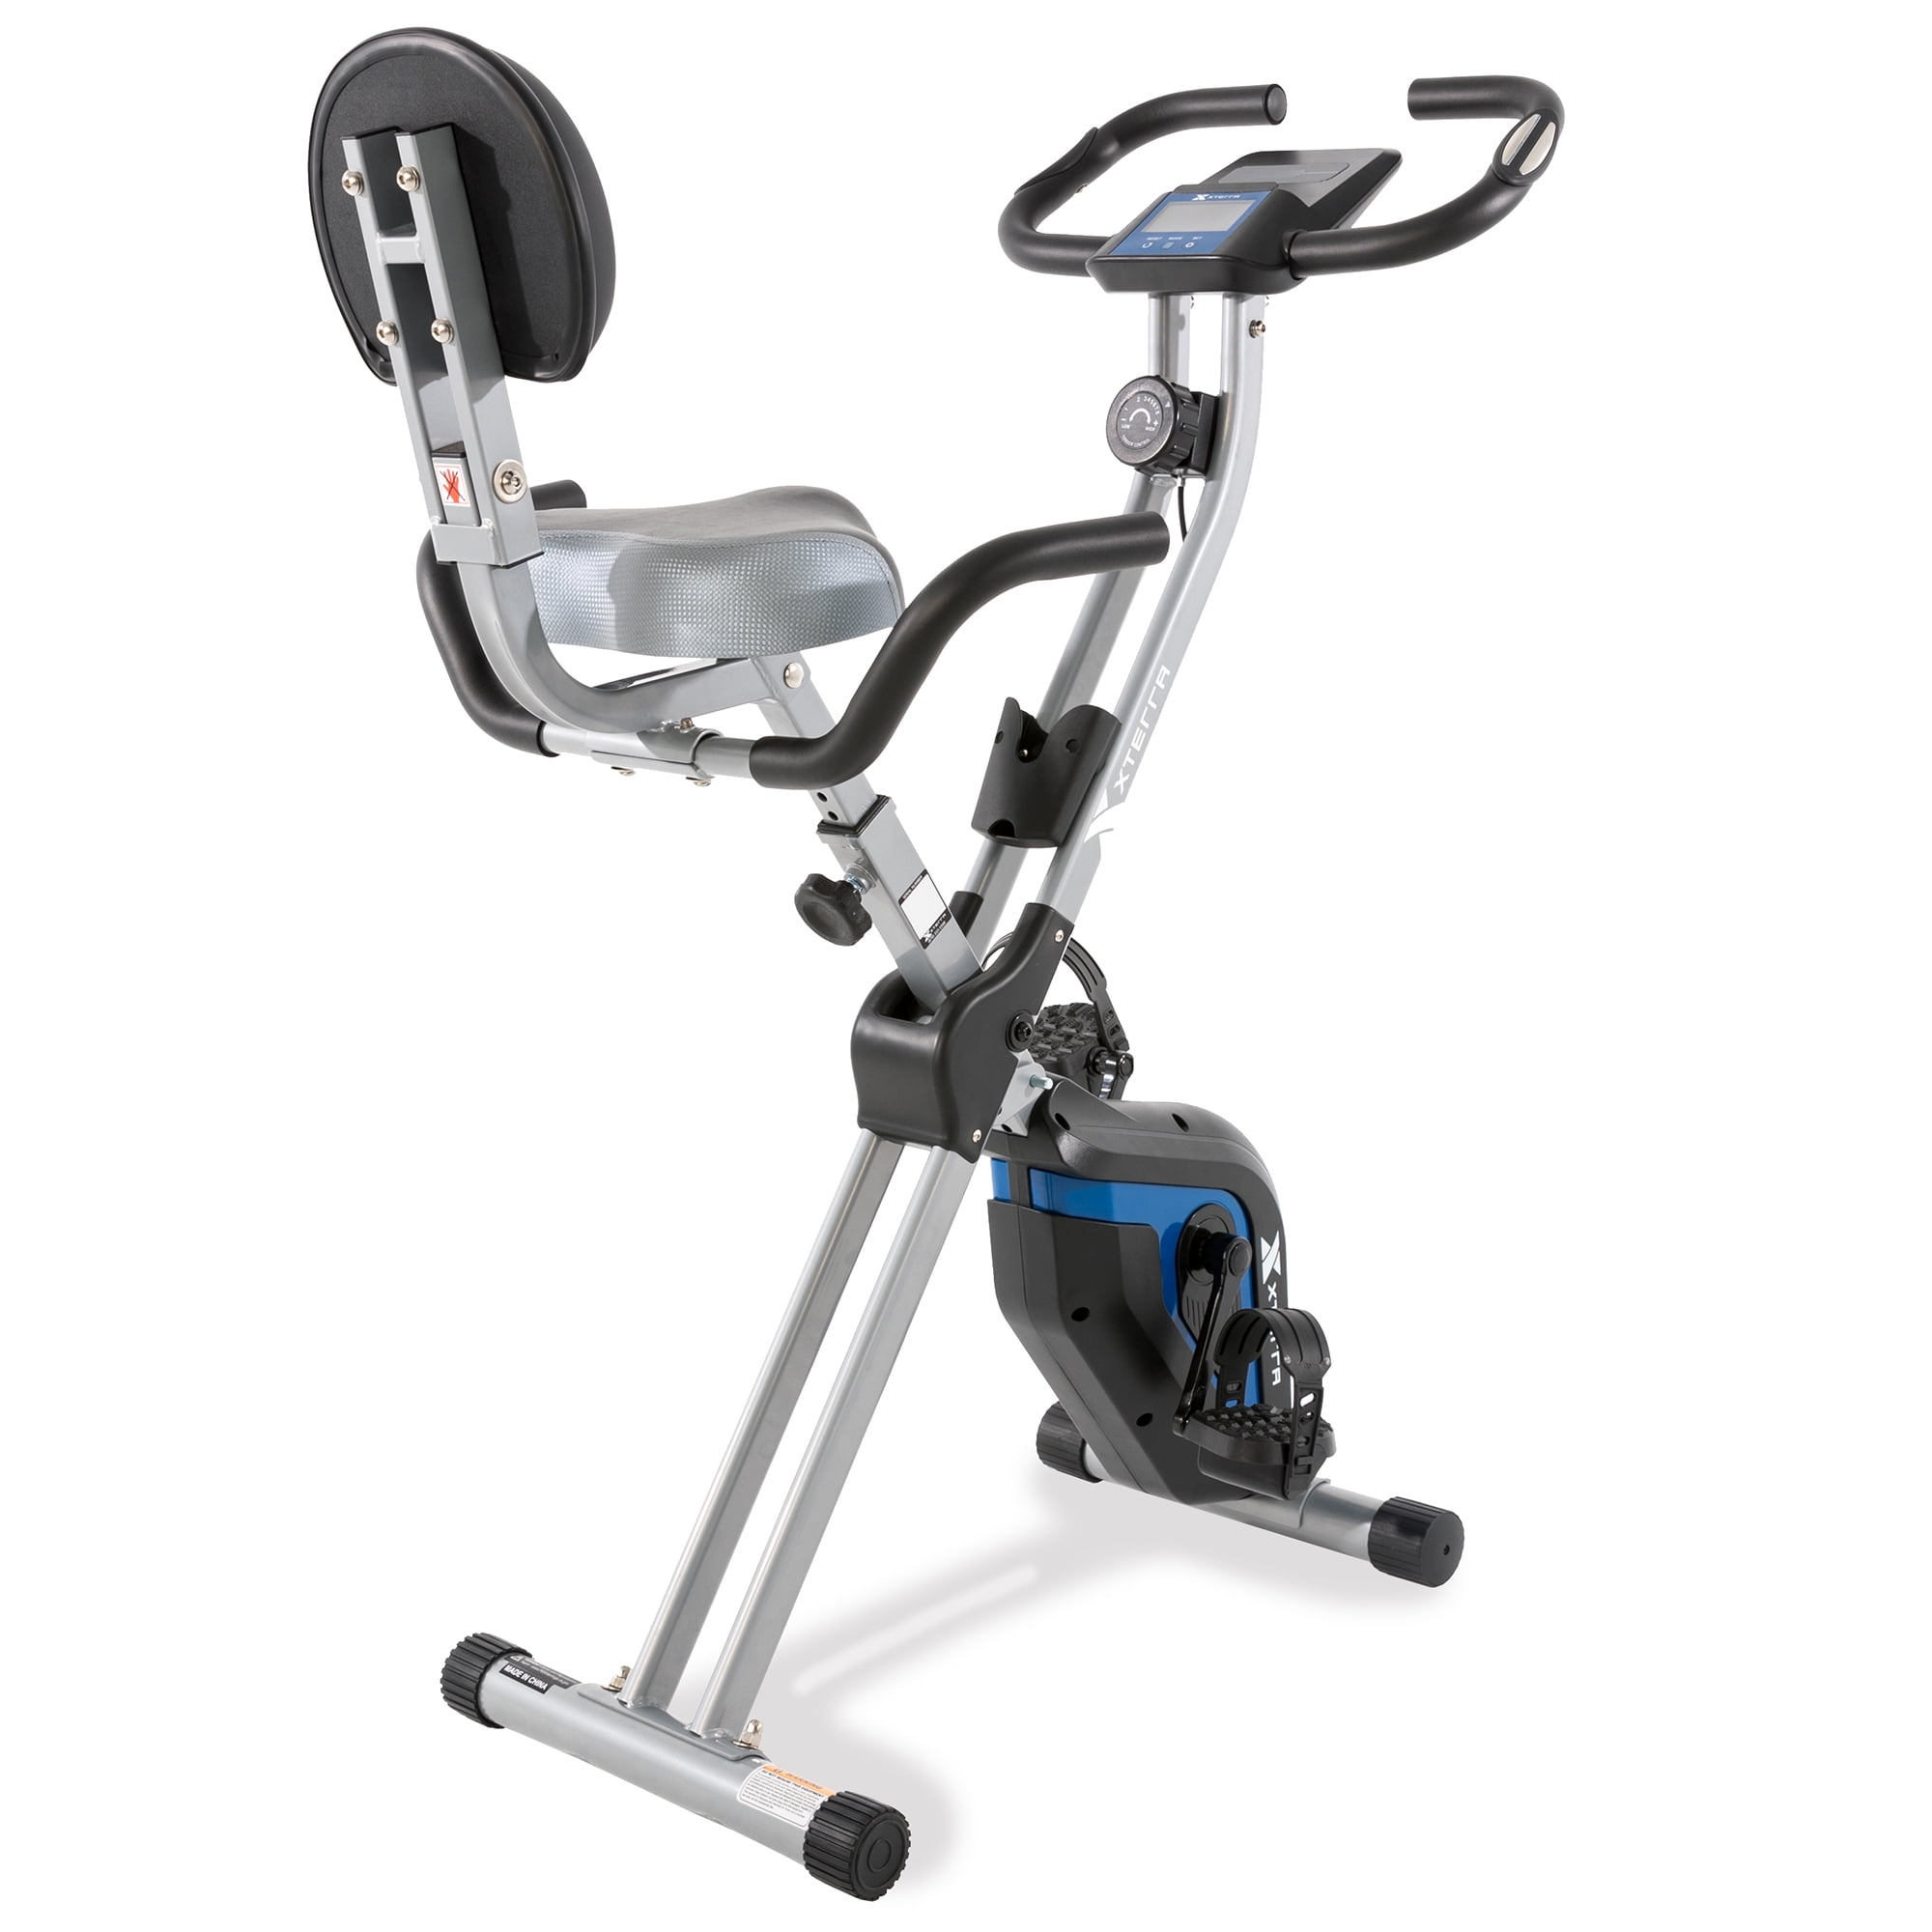 XTERRA Fitness Compact Stationary Upright Folding Bike with Magnetic Resistance and 250 lb Weight Limit - Walmart.com